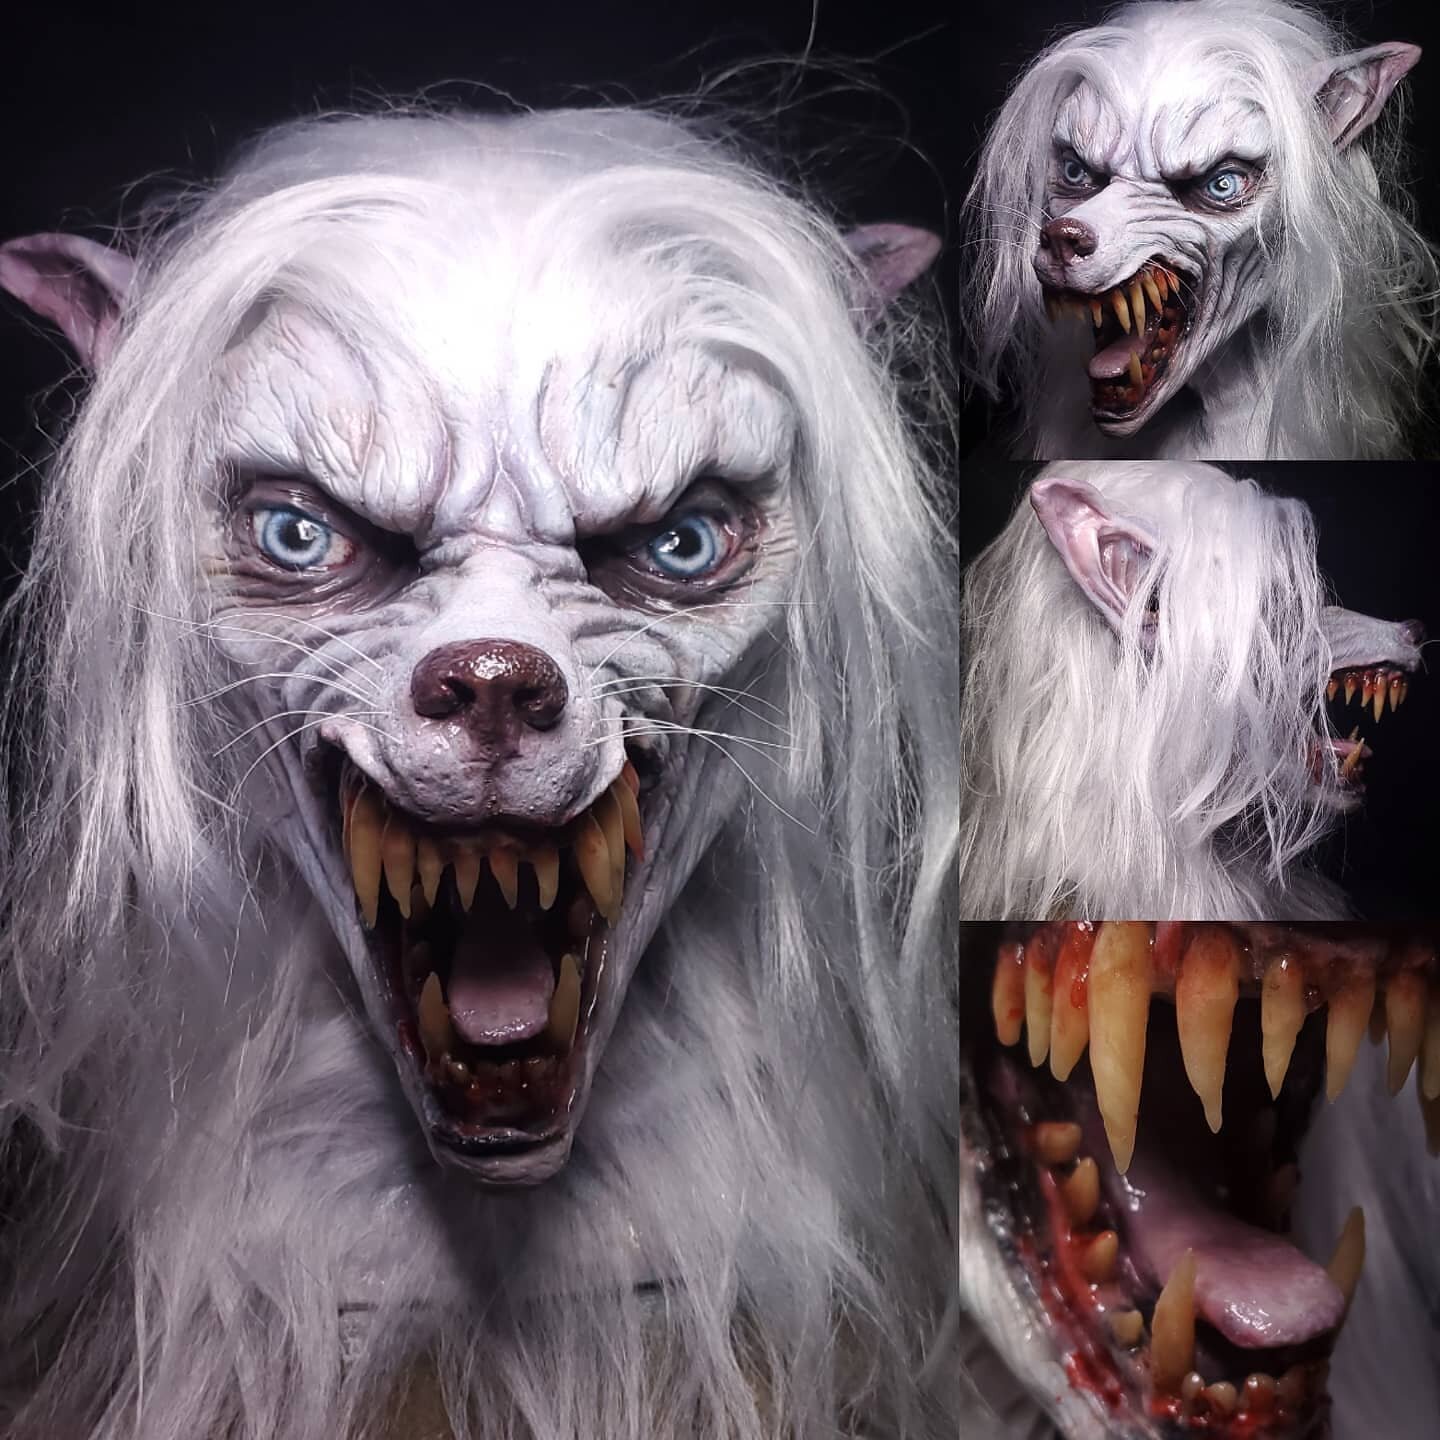 Made an albino Winter Werewolf mask for a customer! I love this one and wanted to keep it. 😂

#fx #specialfx #sculpture #sculpting #art #albino #horror #halloween #halloweenmask #howling #mask #masks #props #werewolf #werewolfwednesday #wolf #whitew